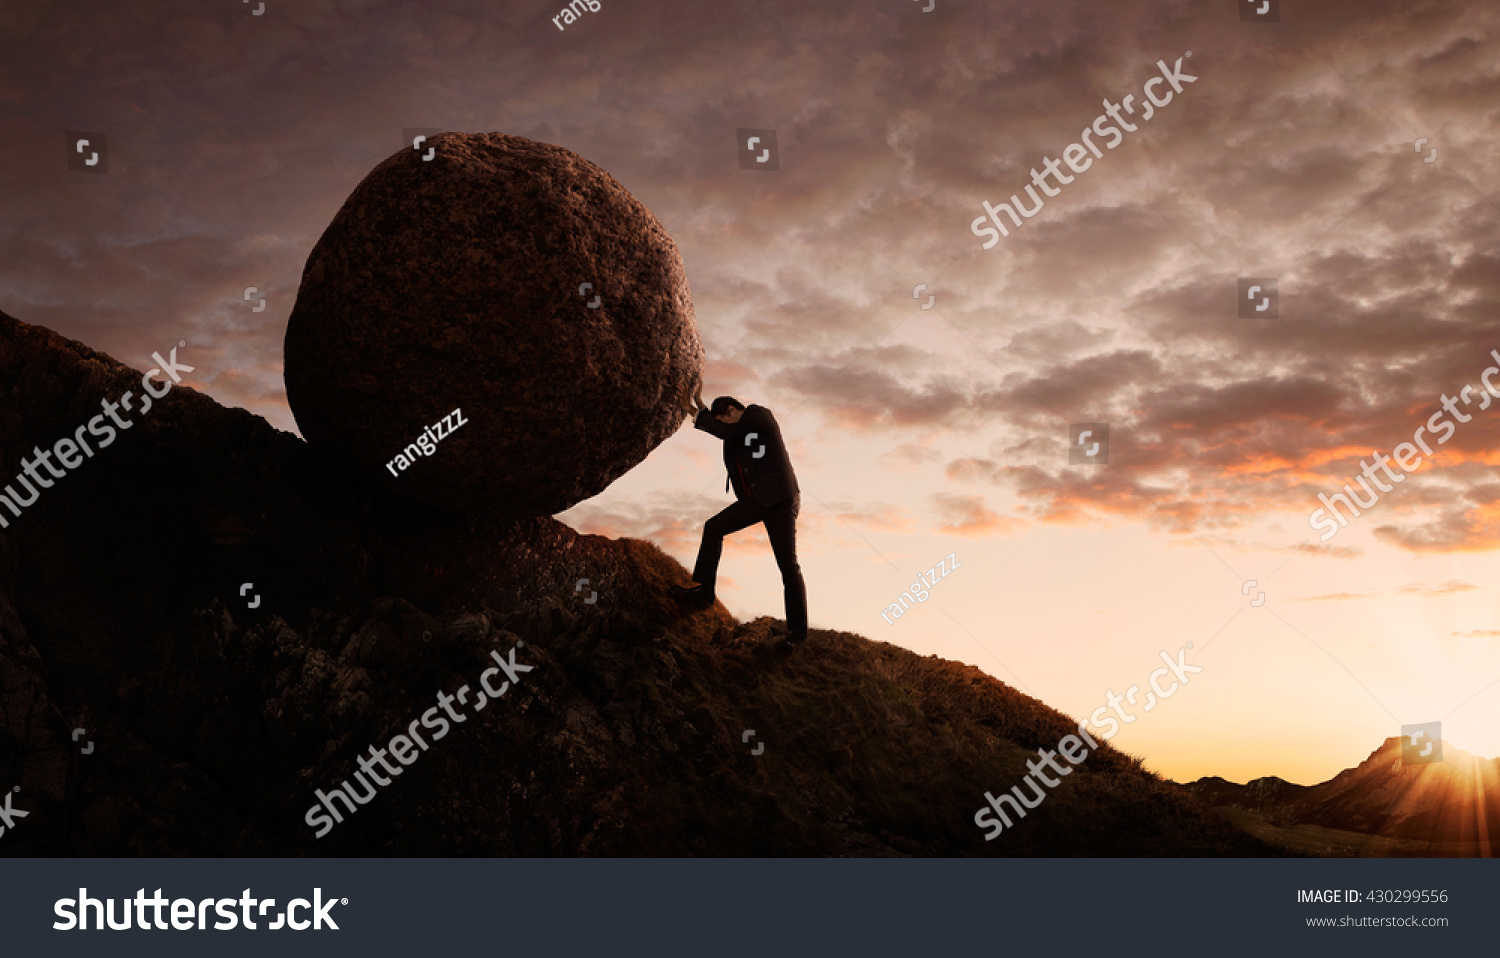 Business concept, Young businessman pushing large stone uphill with copy space #430299556